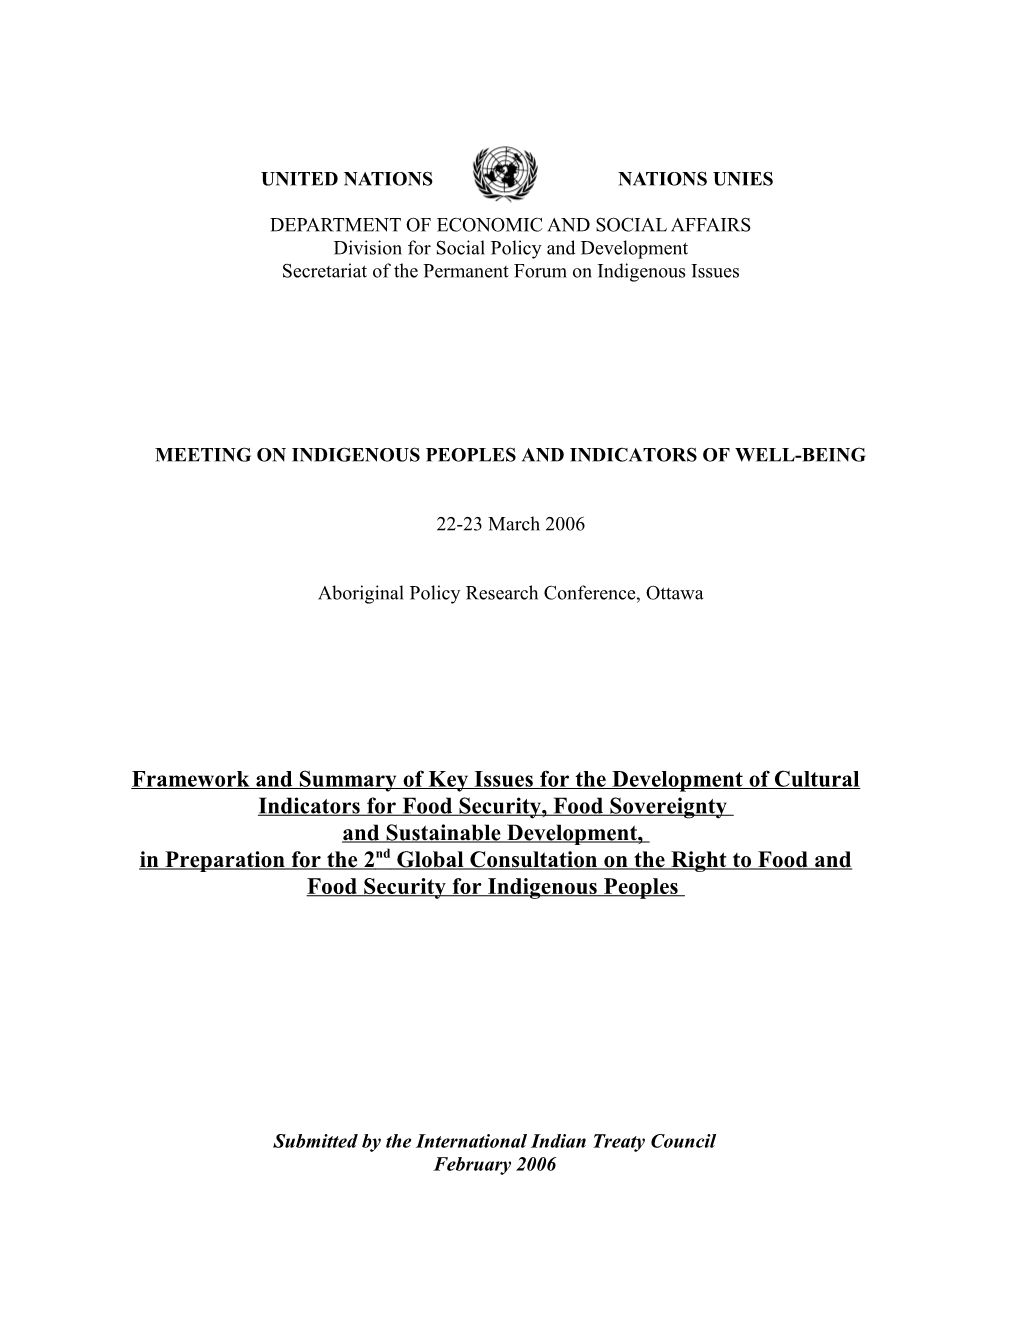 Framework and Key Issues for the Development of Cultrual Idnicatrs Or Food Security A